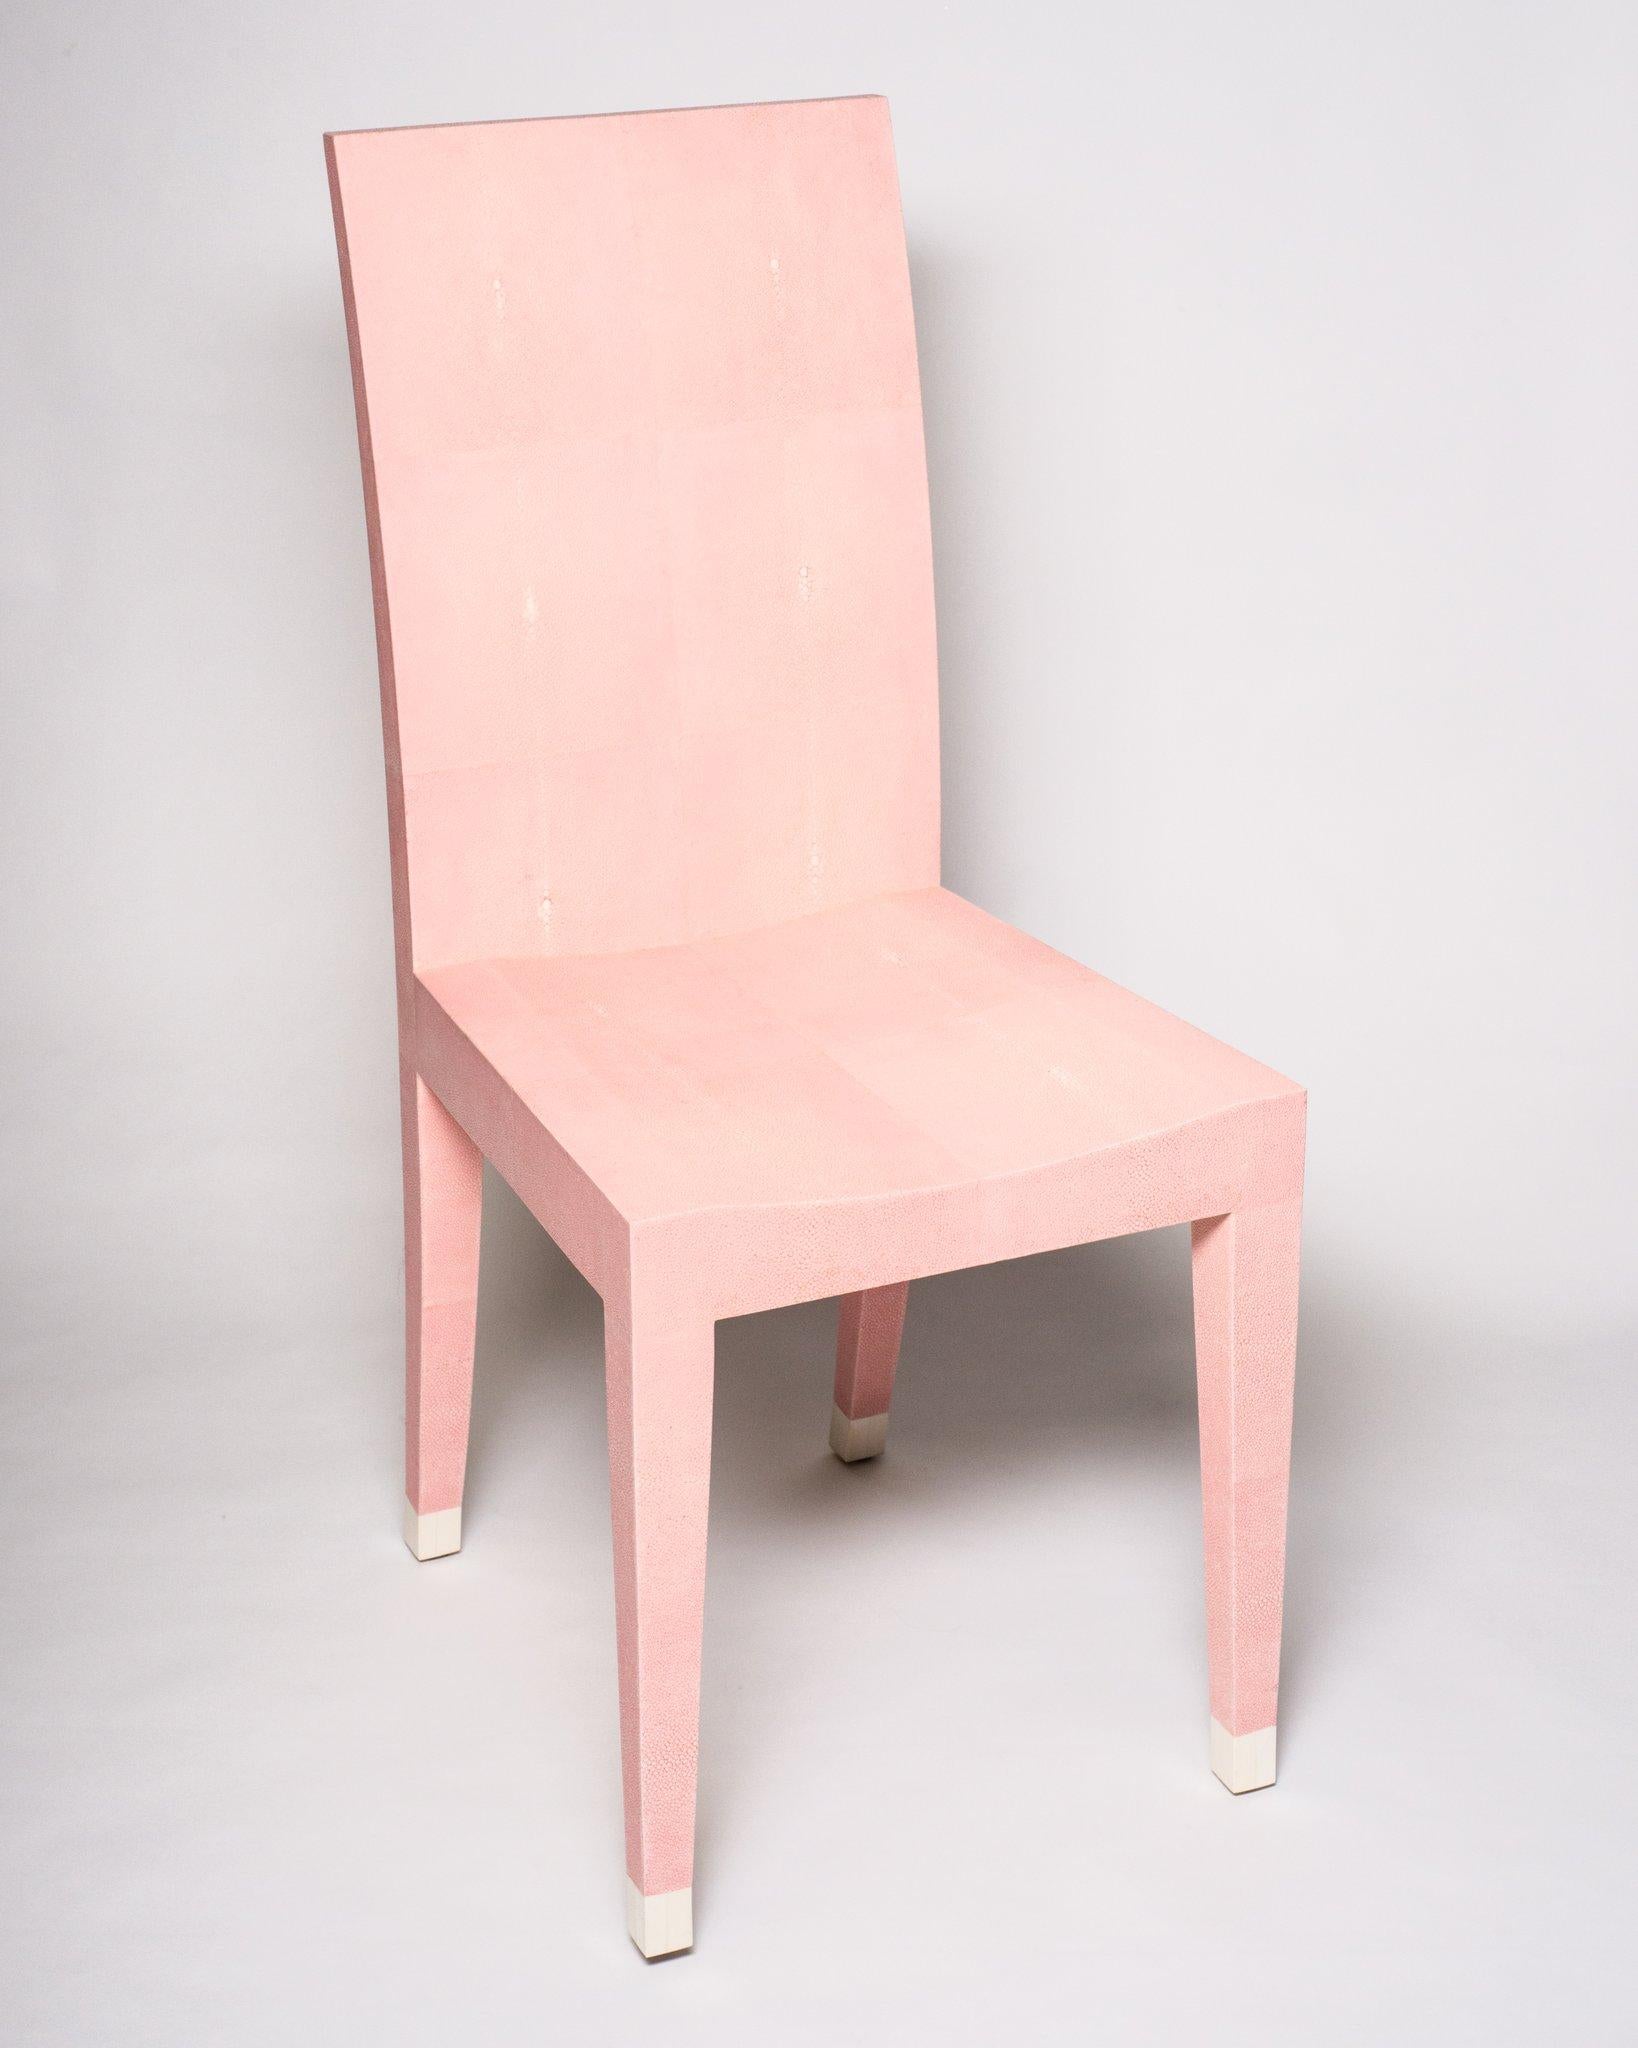 An authentic Shagreen Rose de Paris chair. Working with the vendor in Asia this particular genteel shade of pink called Rose de Paris was custom produced. The refined tapered leg is capped with a bone toe. This elegant, versatile, yet modern chair